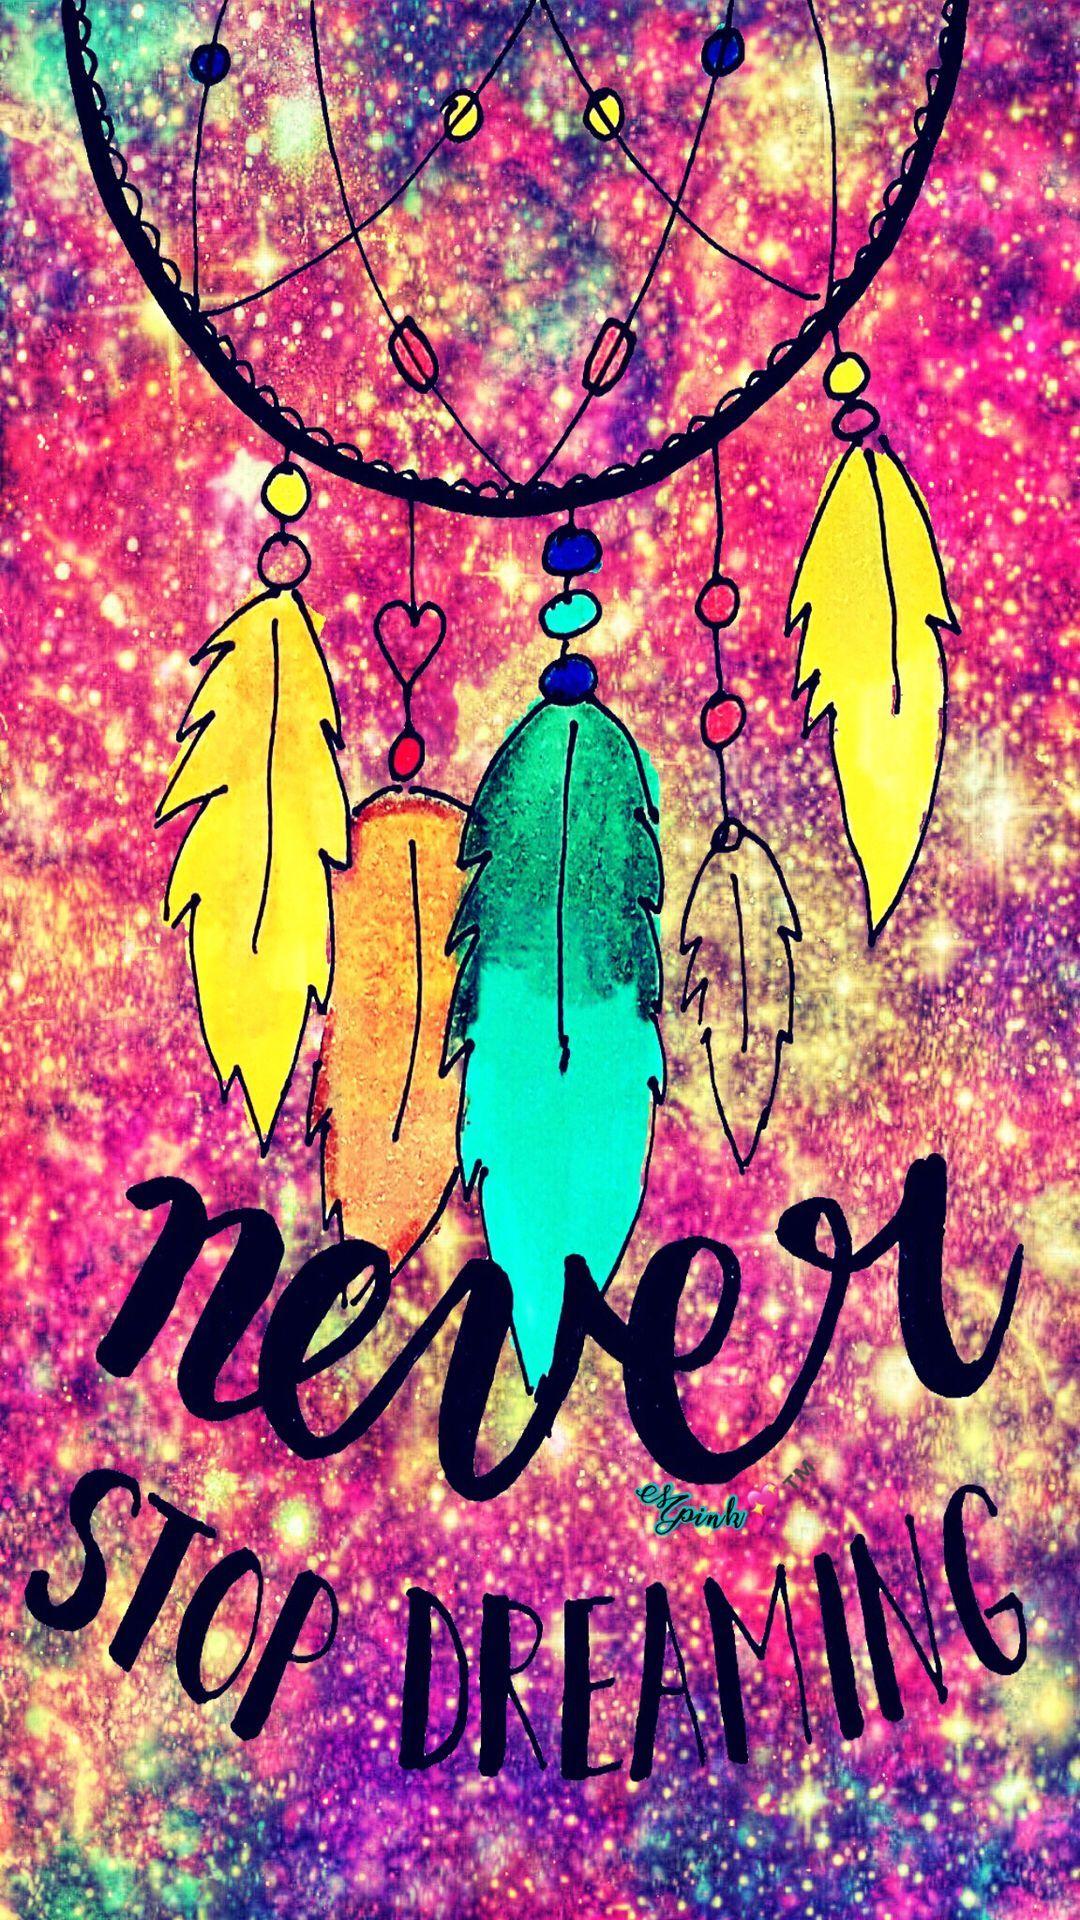 Never Stop Dreaming Galaxy Wallpaper #androidwallpaper